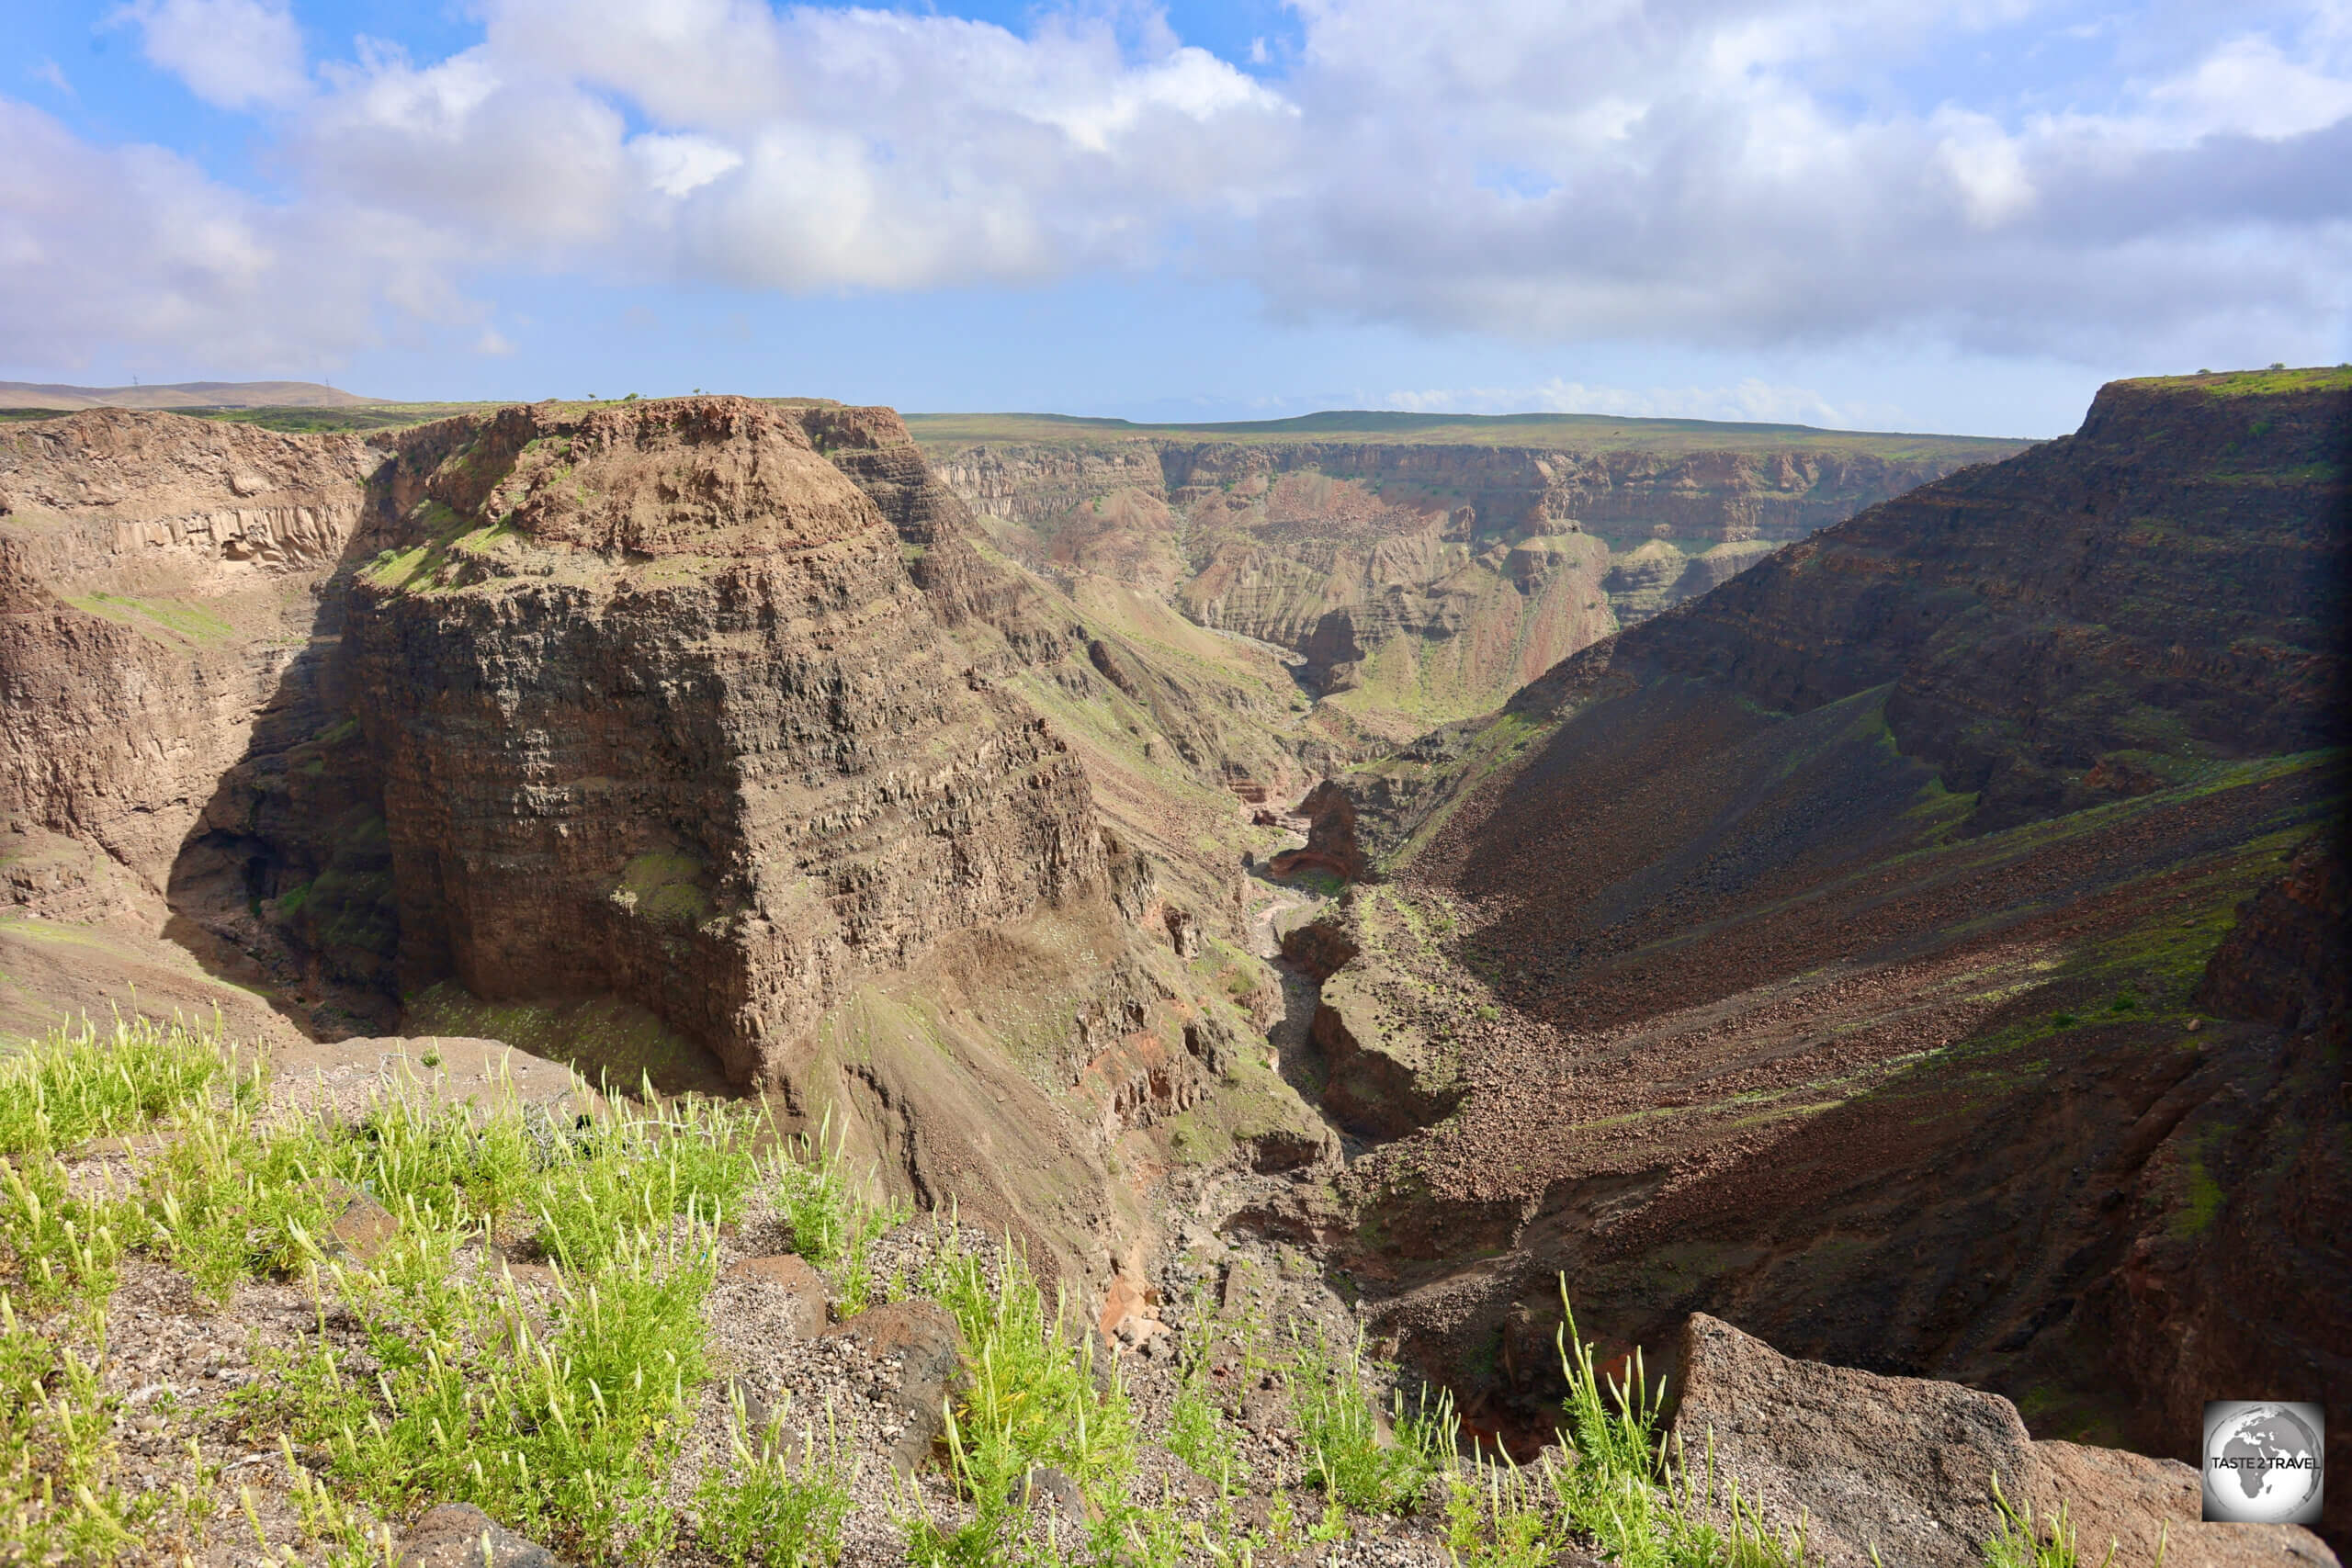 Djibouti's Grand Canyon is located at a point where three tectonic plates are pulling apart - i.e. rifting.